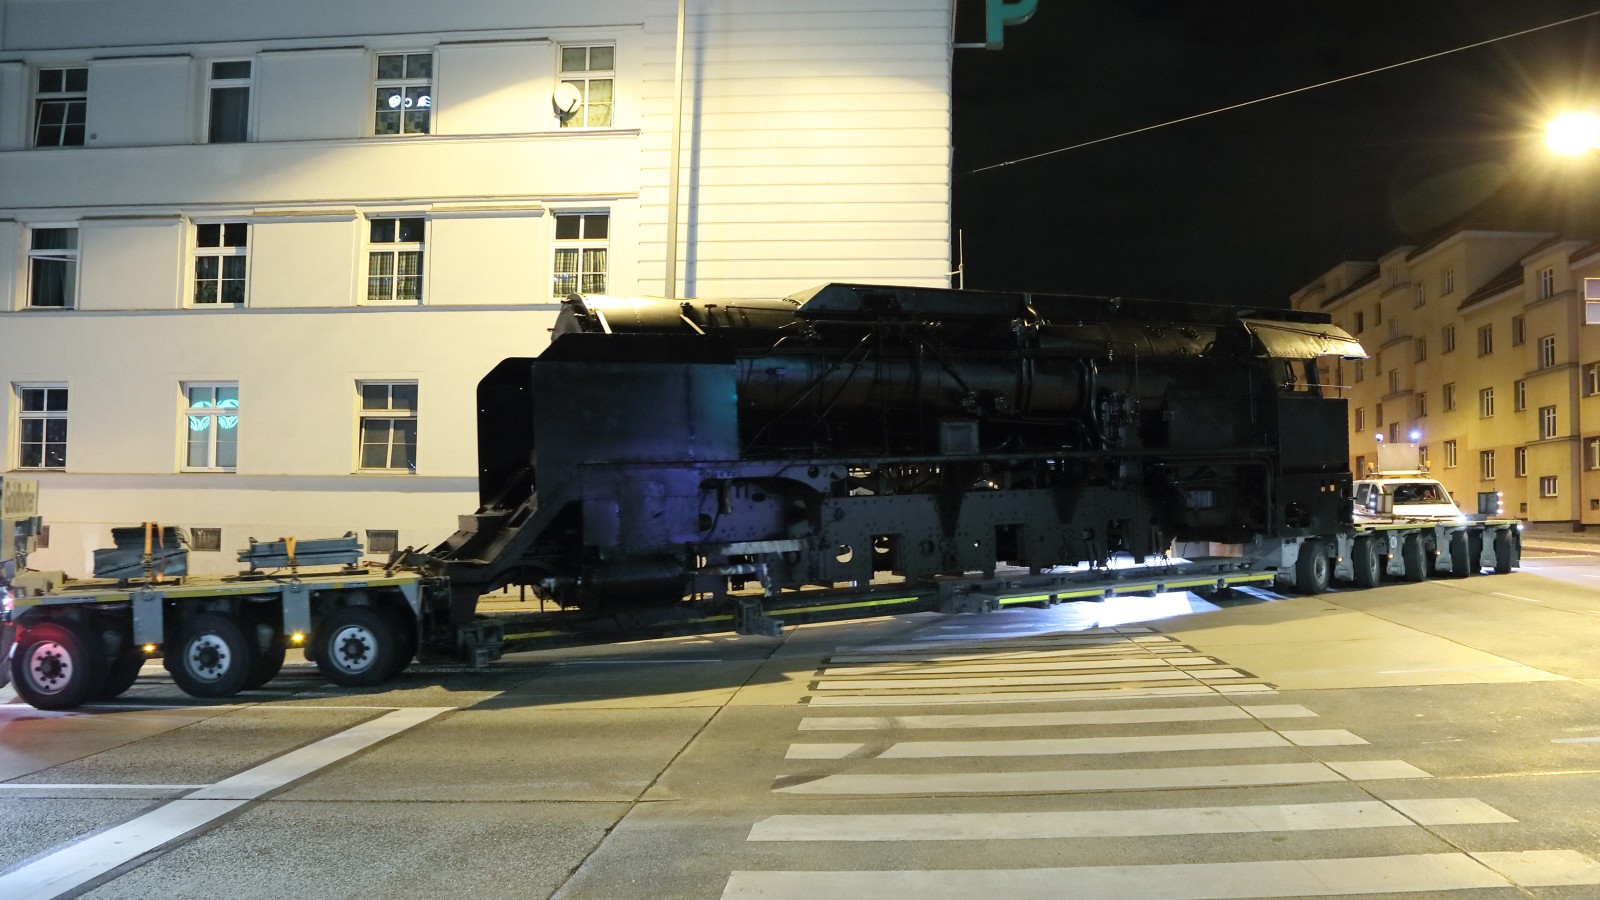 The 12.10 locomotive loaded on a low-loader on its way to the Technisches Museum Wien